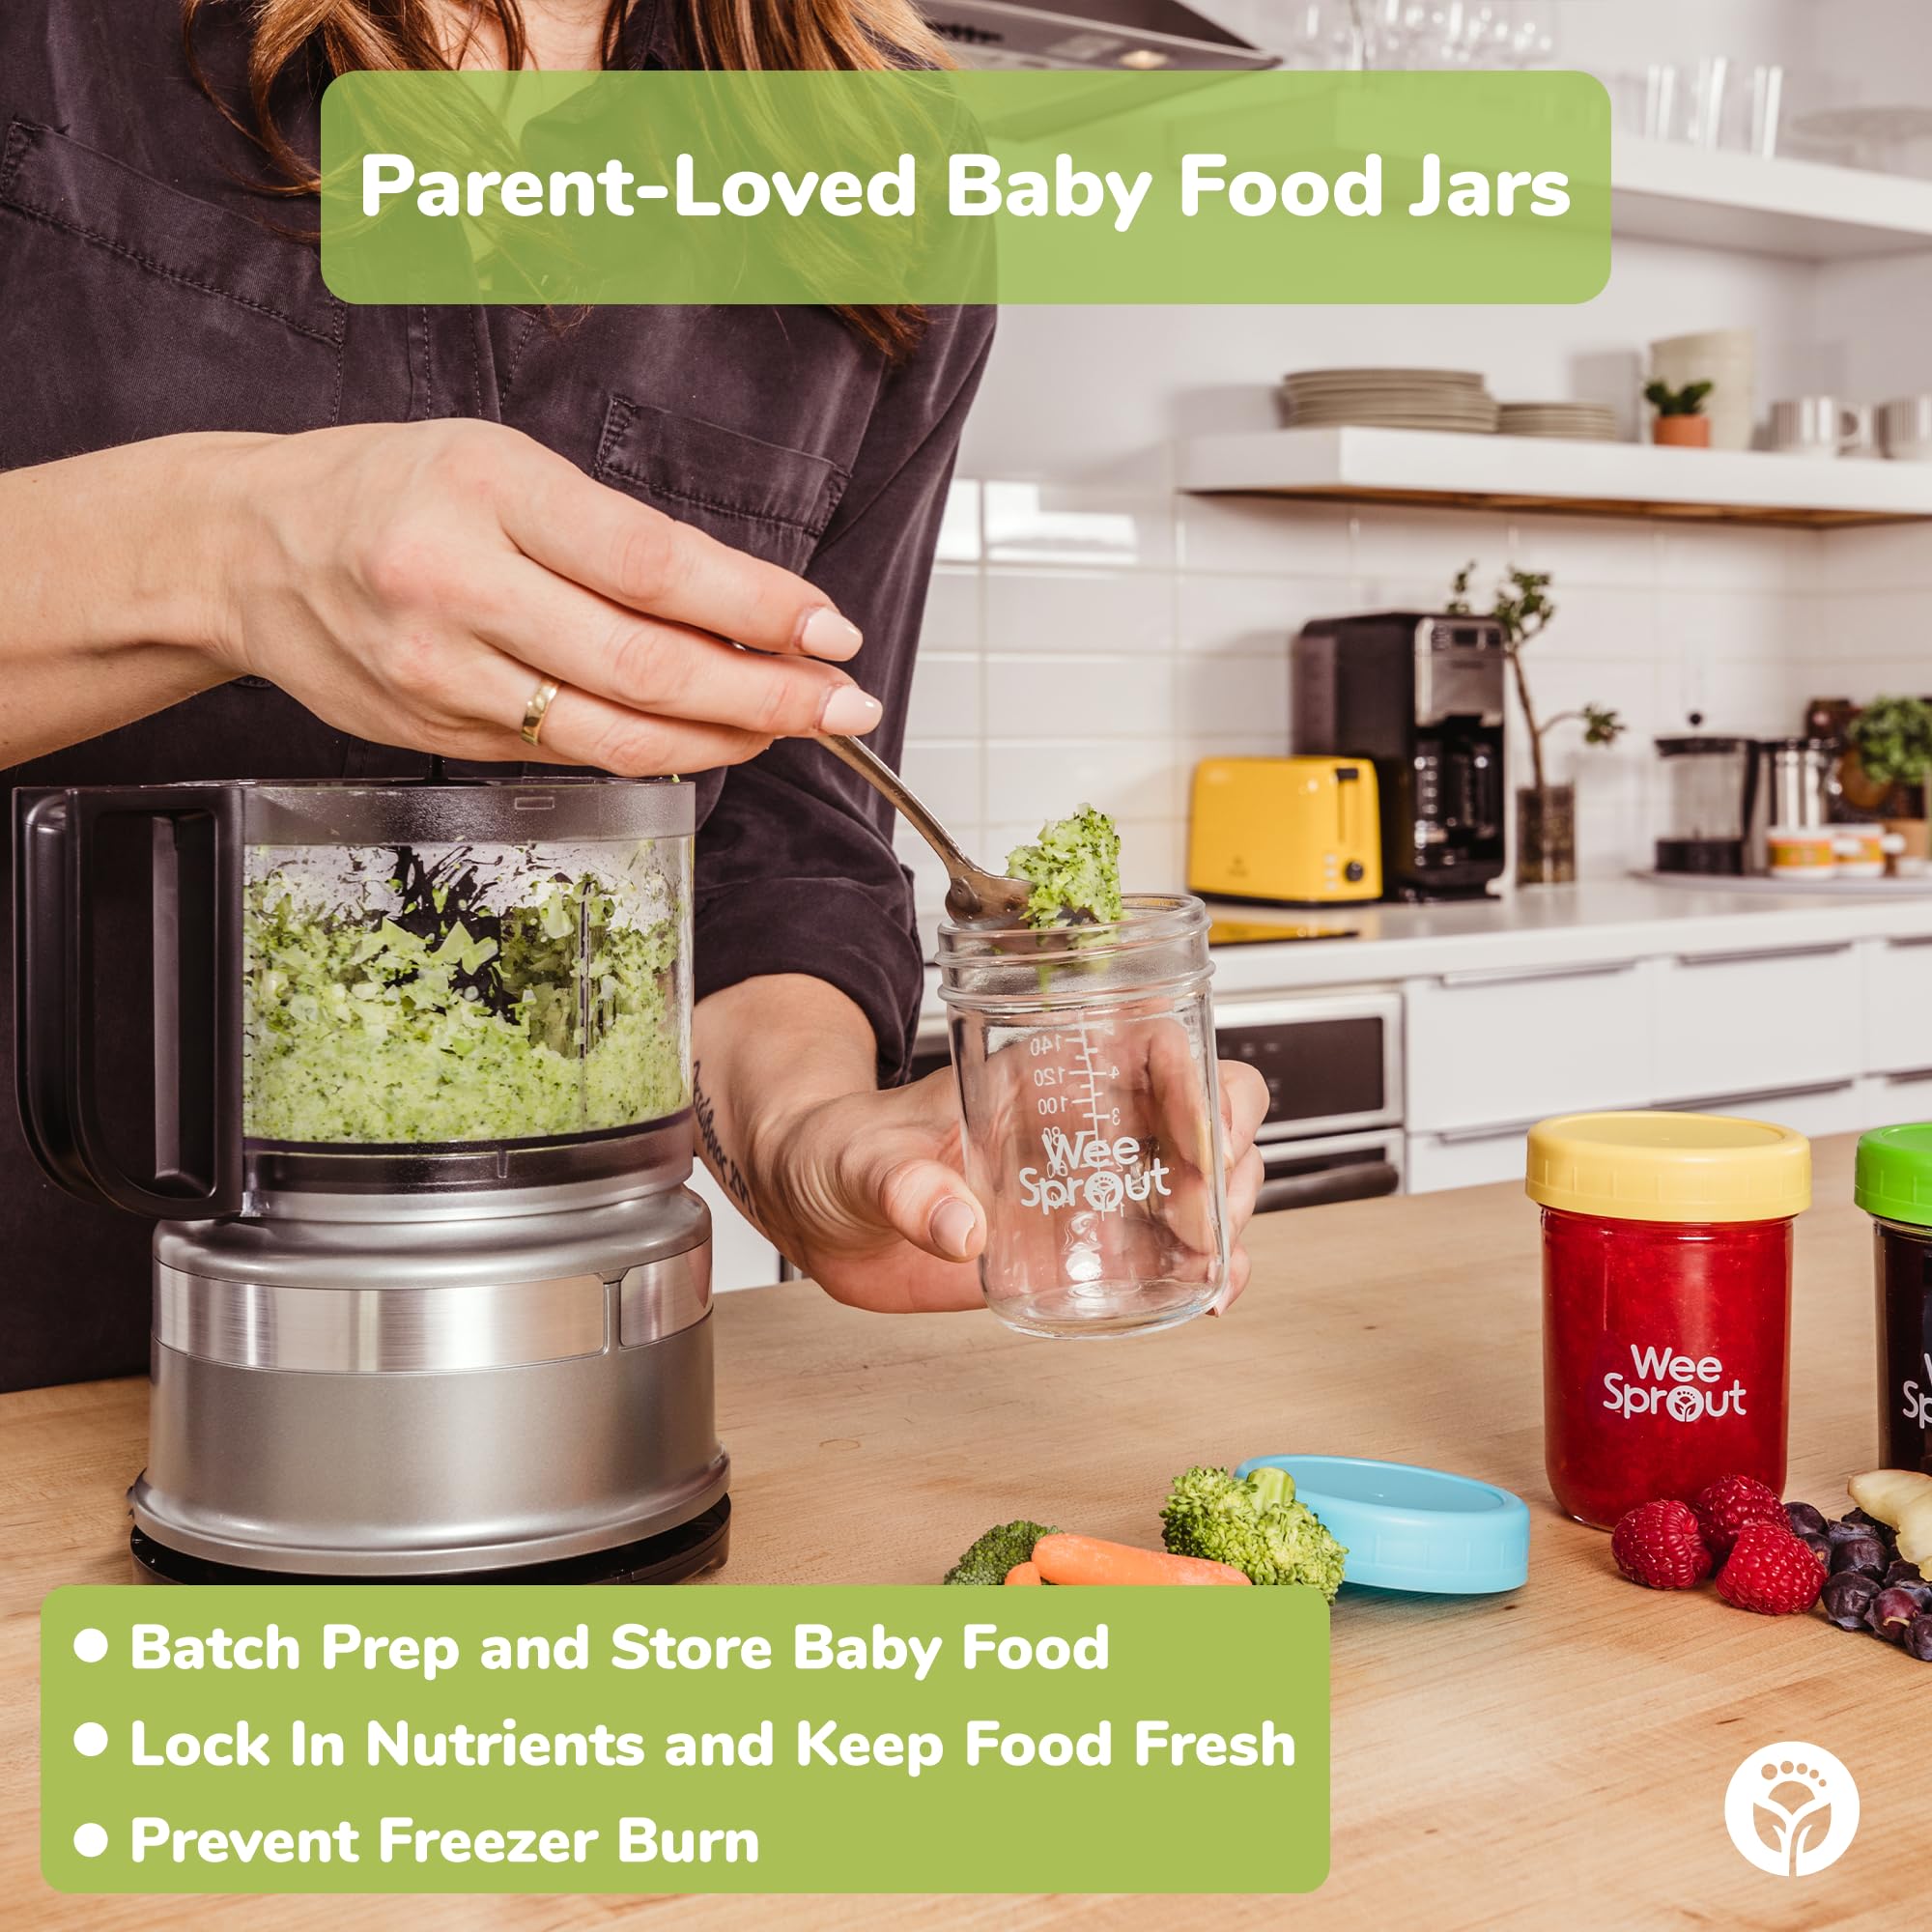 WeeSprout Glass Baby Food Storage Jars - 12 Set, 4 oz Baby Food Jars with Plastic Lids, Freezer Storage, Reusable Small Glass Baby Food Containers, Microwave & Dishwasher Safe, for Infant & Baby Food